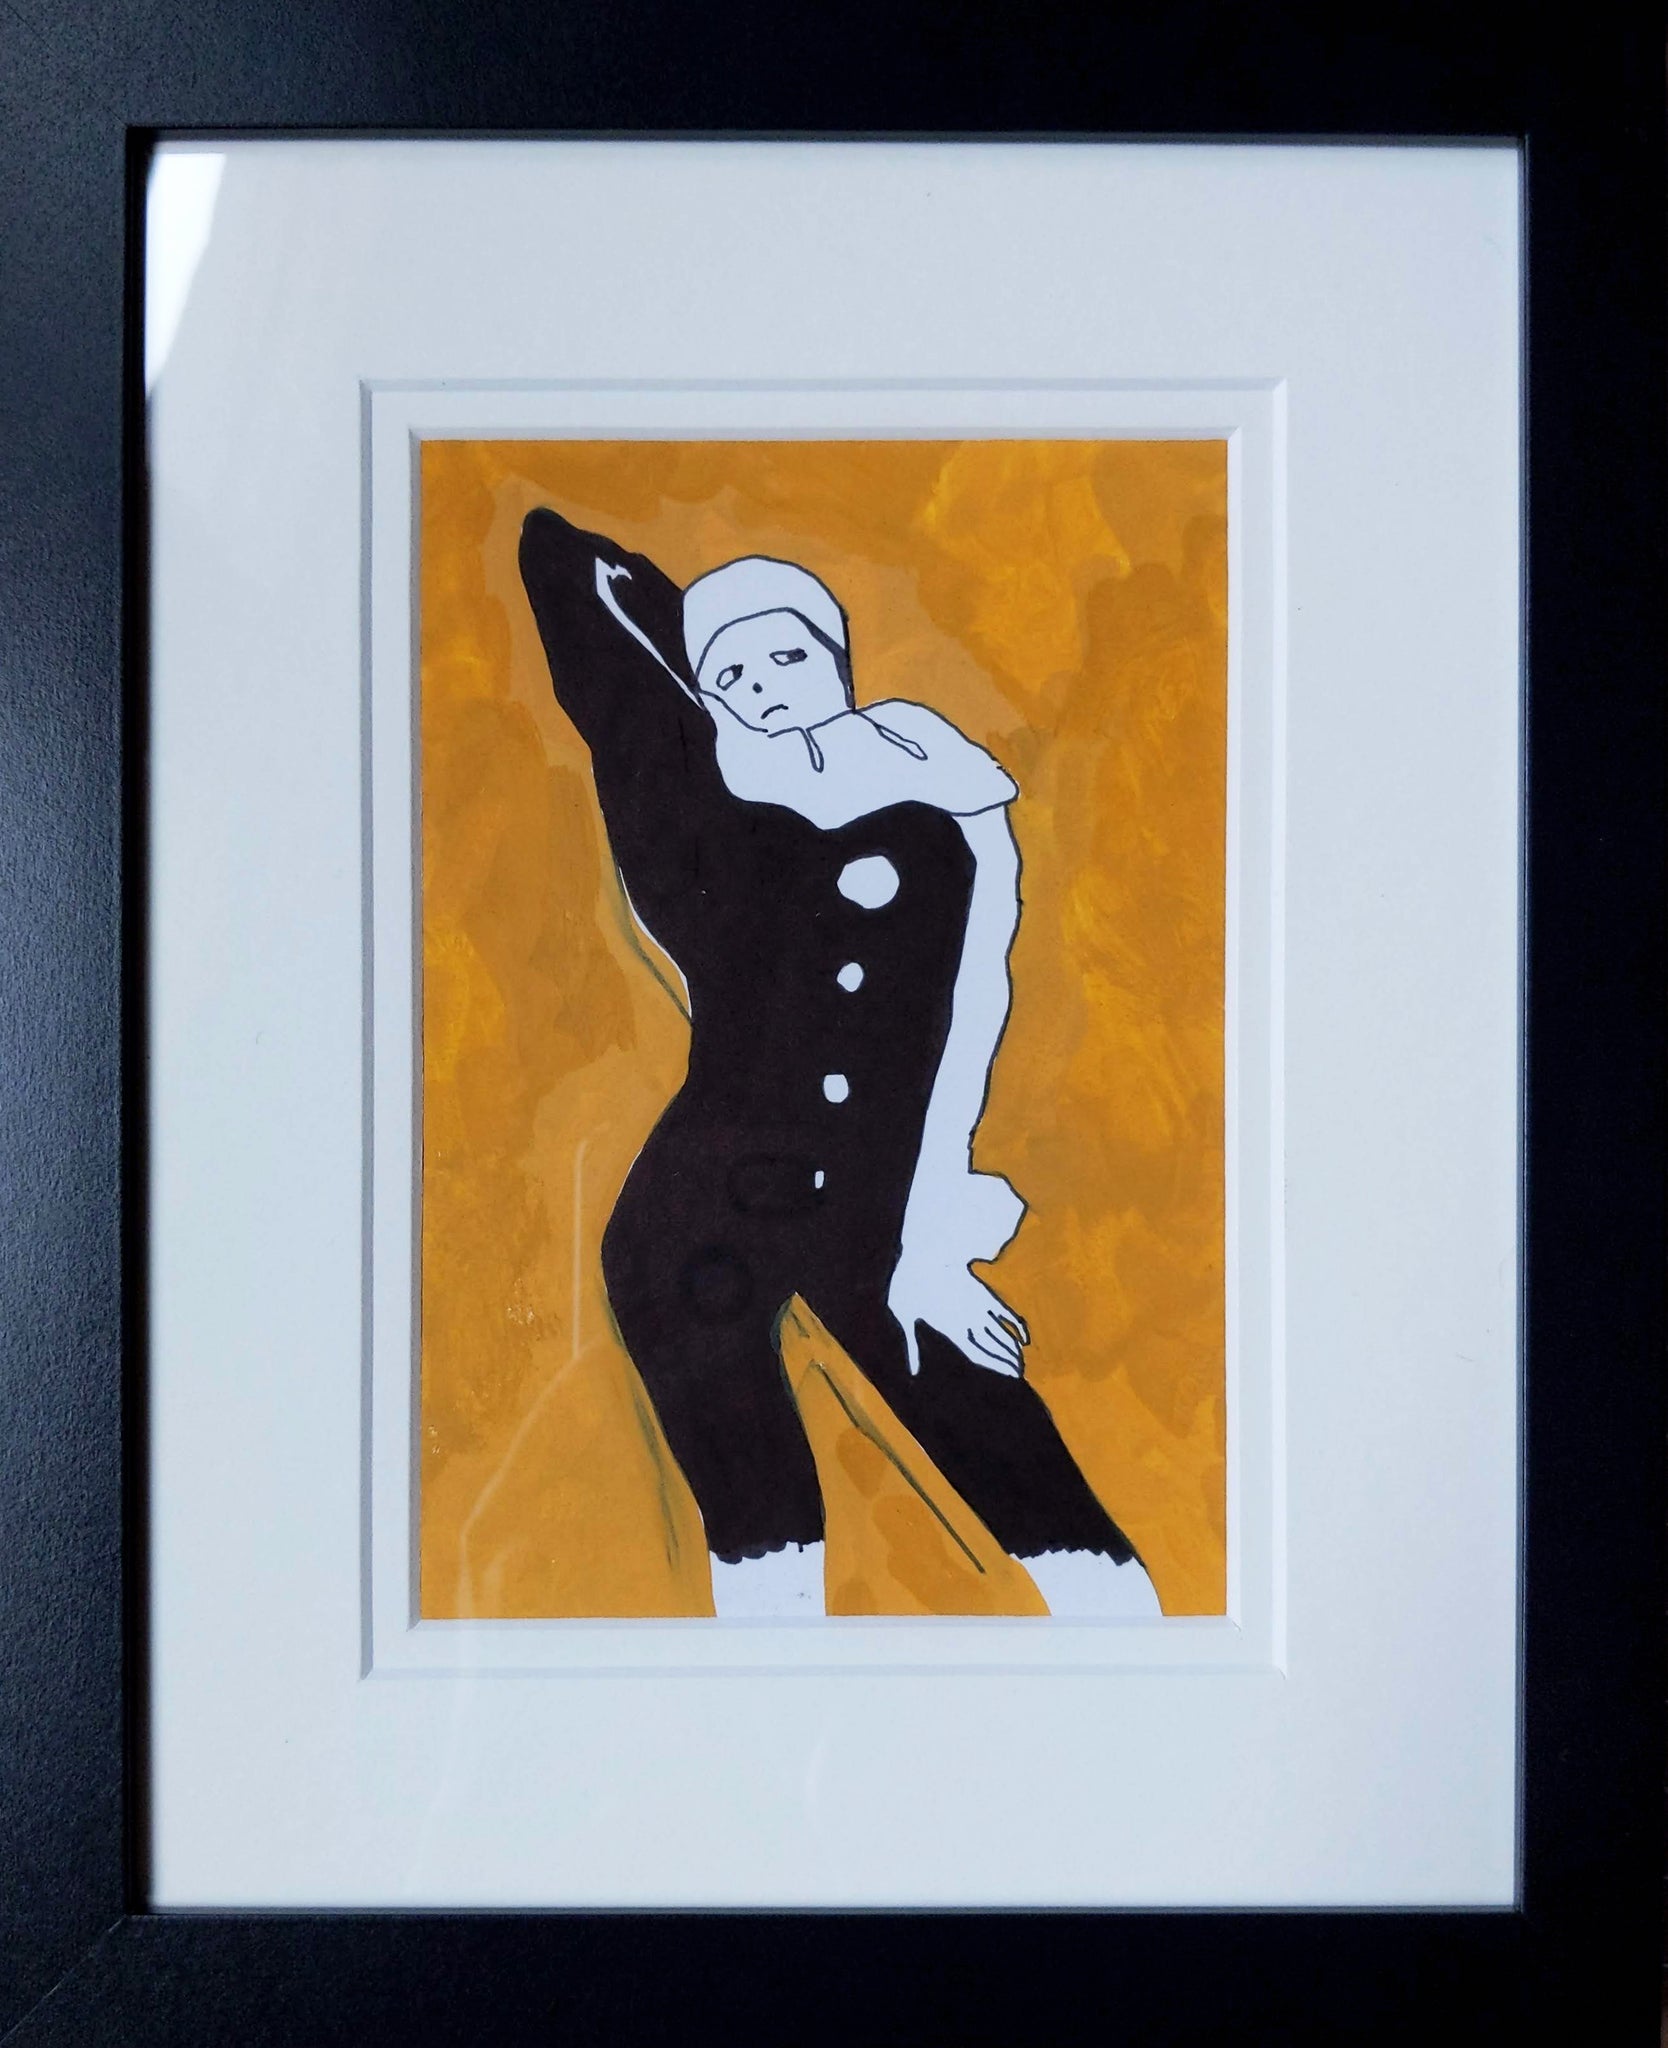 Drawing #100: "Pierrot Moving to the Sound of Marigold" [Gouache and Ink on Illustration Board in Double Matted 8x10 inch Frame]